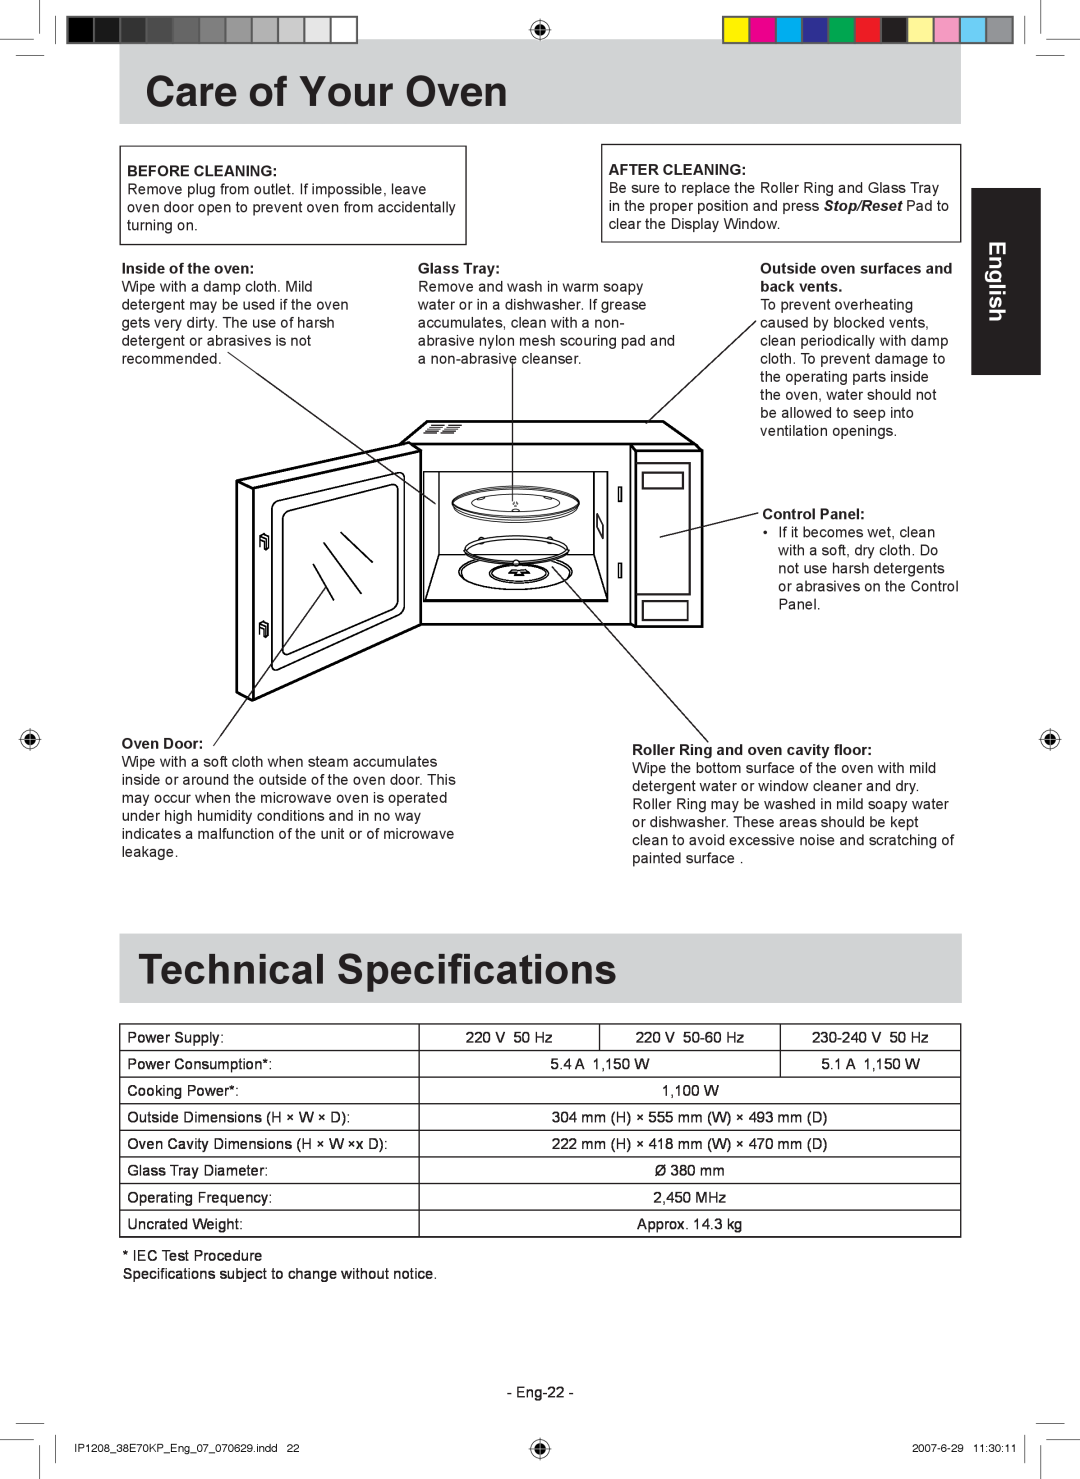 Panasonic NN-ST757W manual Care of Your Oven, Technical Speciﬁcations, English 